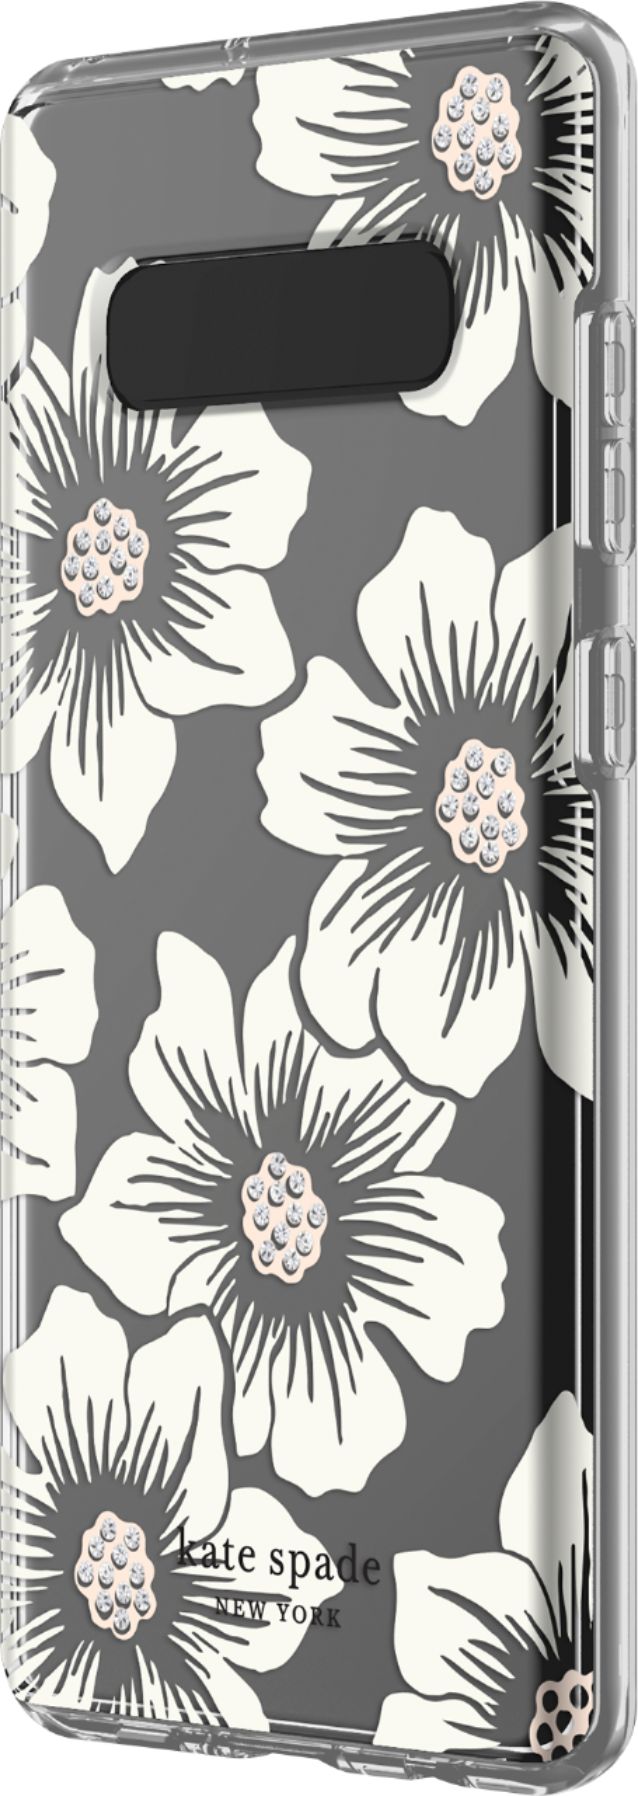 kate spade new york - Protective Hardshell Case for Samsung Galaxy S10+ - Hollyhock Floral